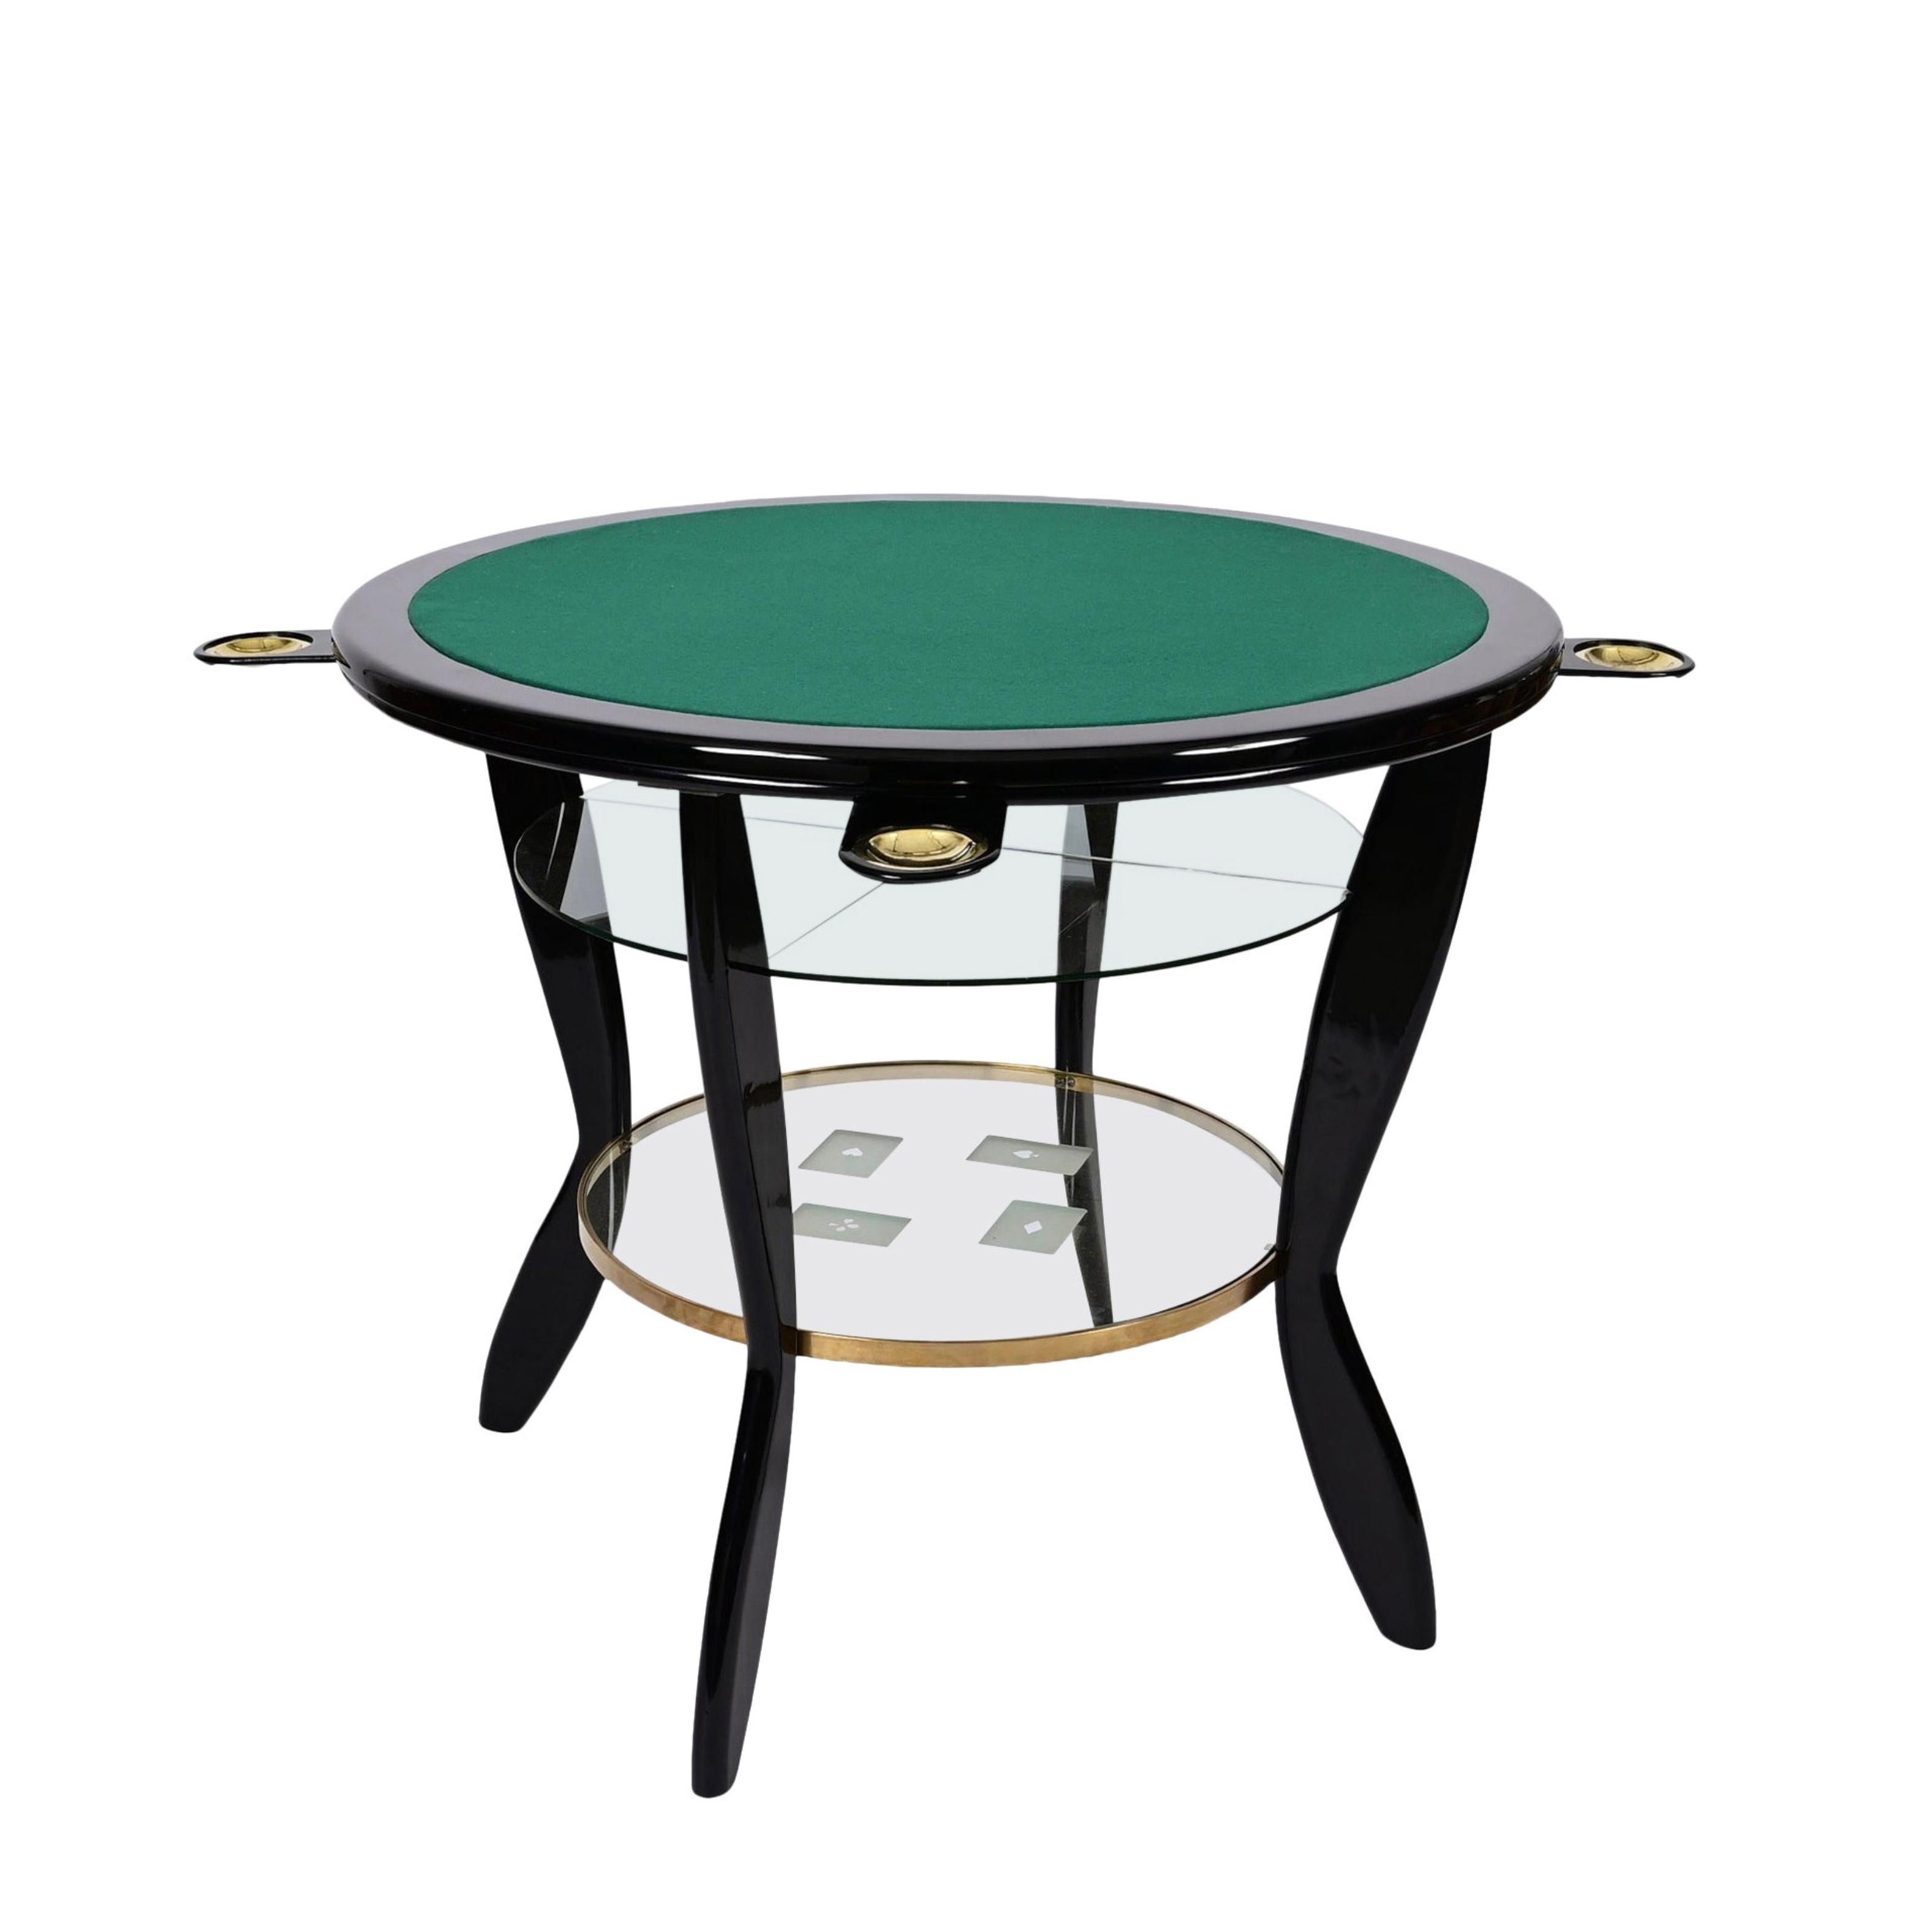 Gio Ponti Style Ebonized Beech and Brass Italian Game Table with Glass, 1950s In Good Condition For Sale In Roma, IT